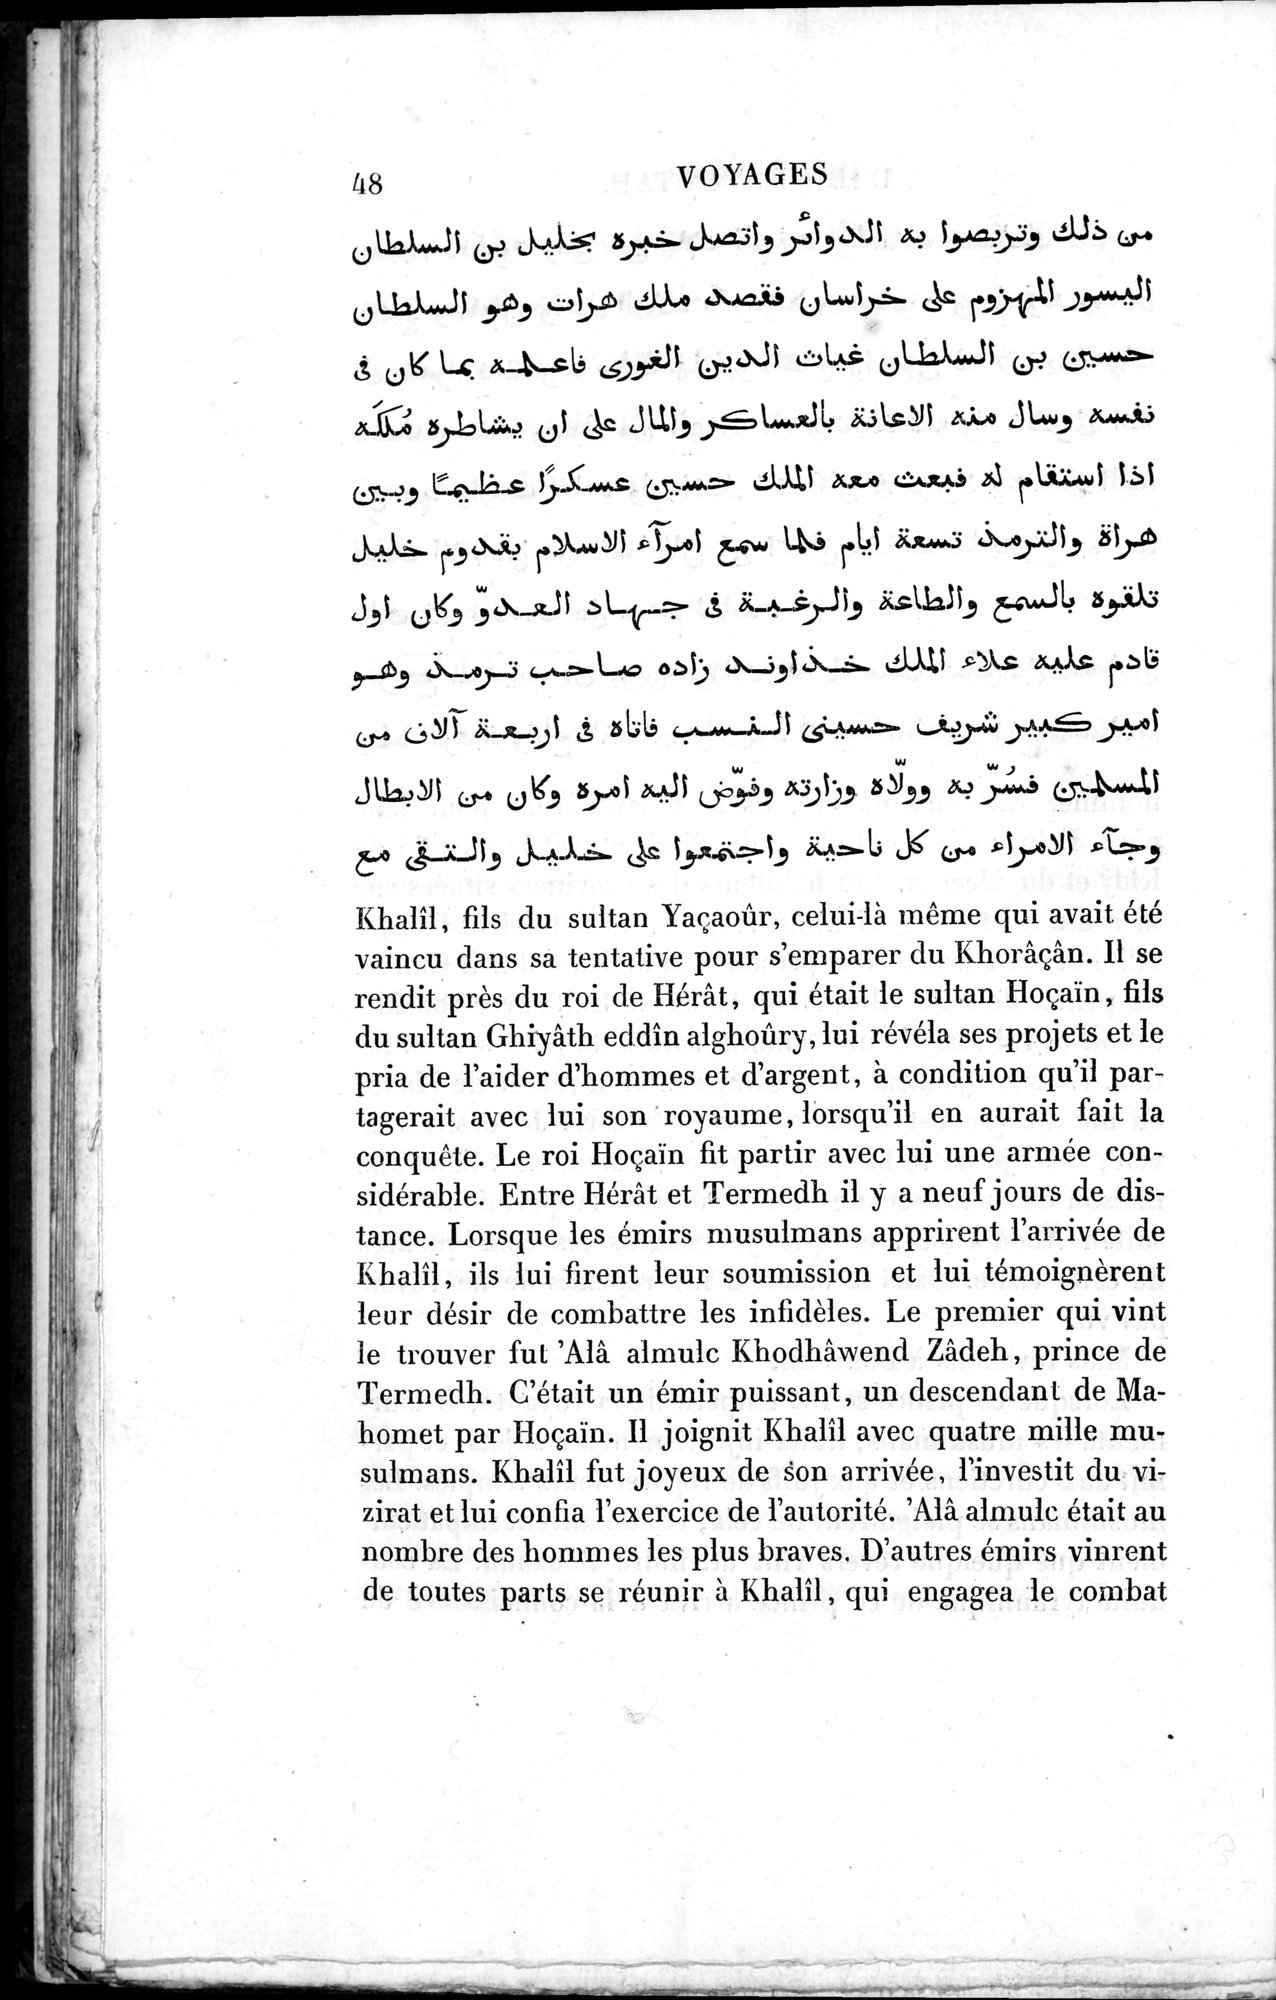 Voyages d'Ibn Batoutah : vol.3 / Page 88 (Grayscale High Resolution Image)